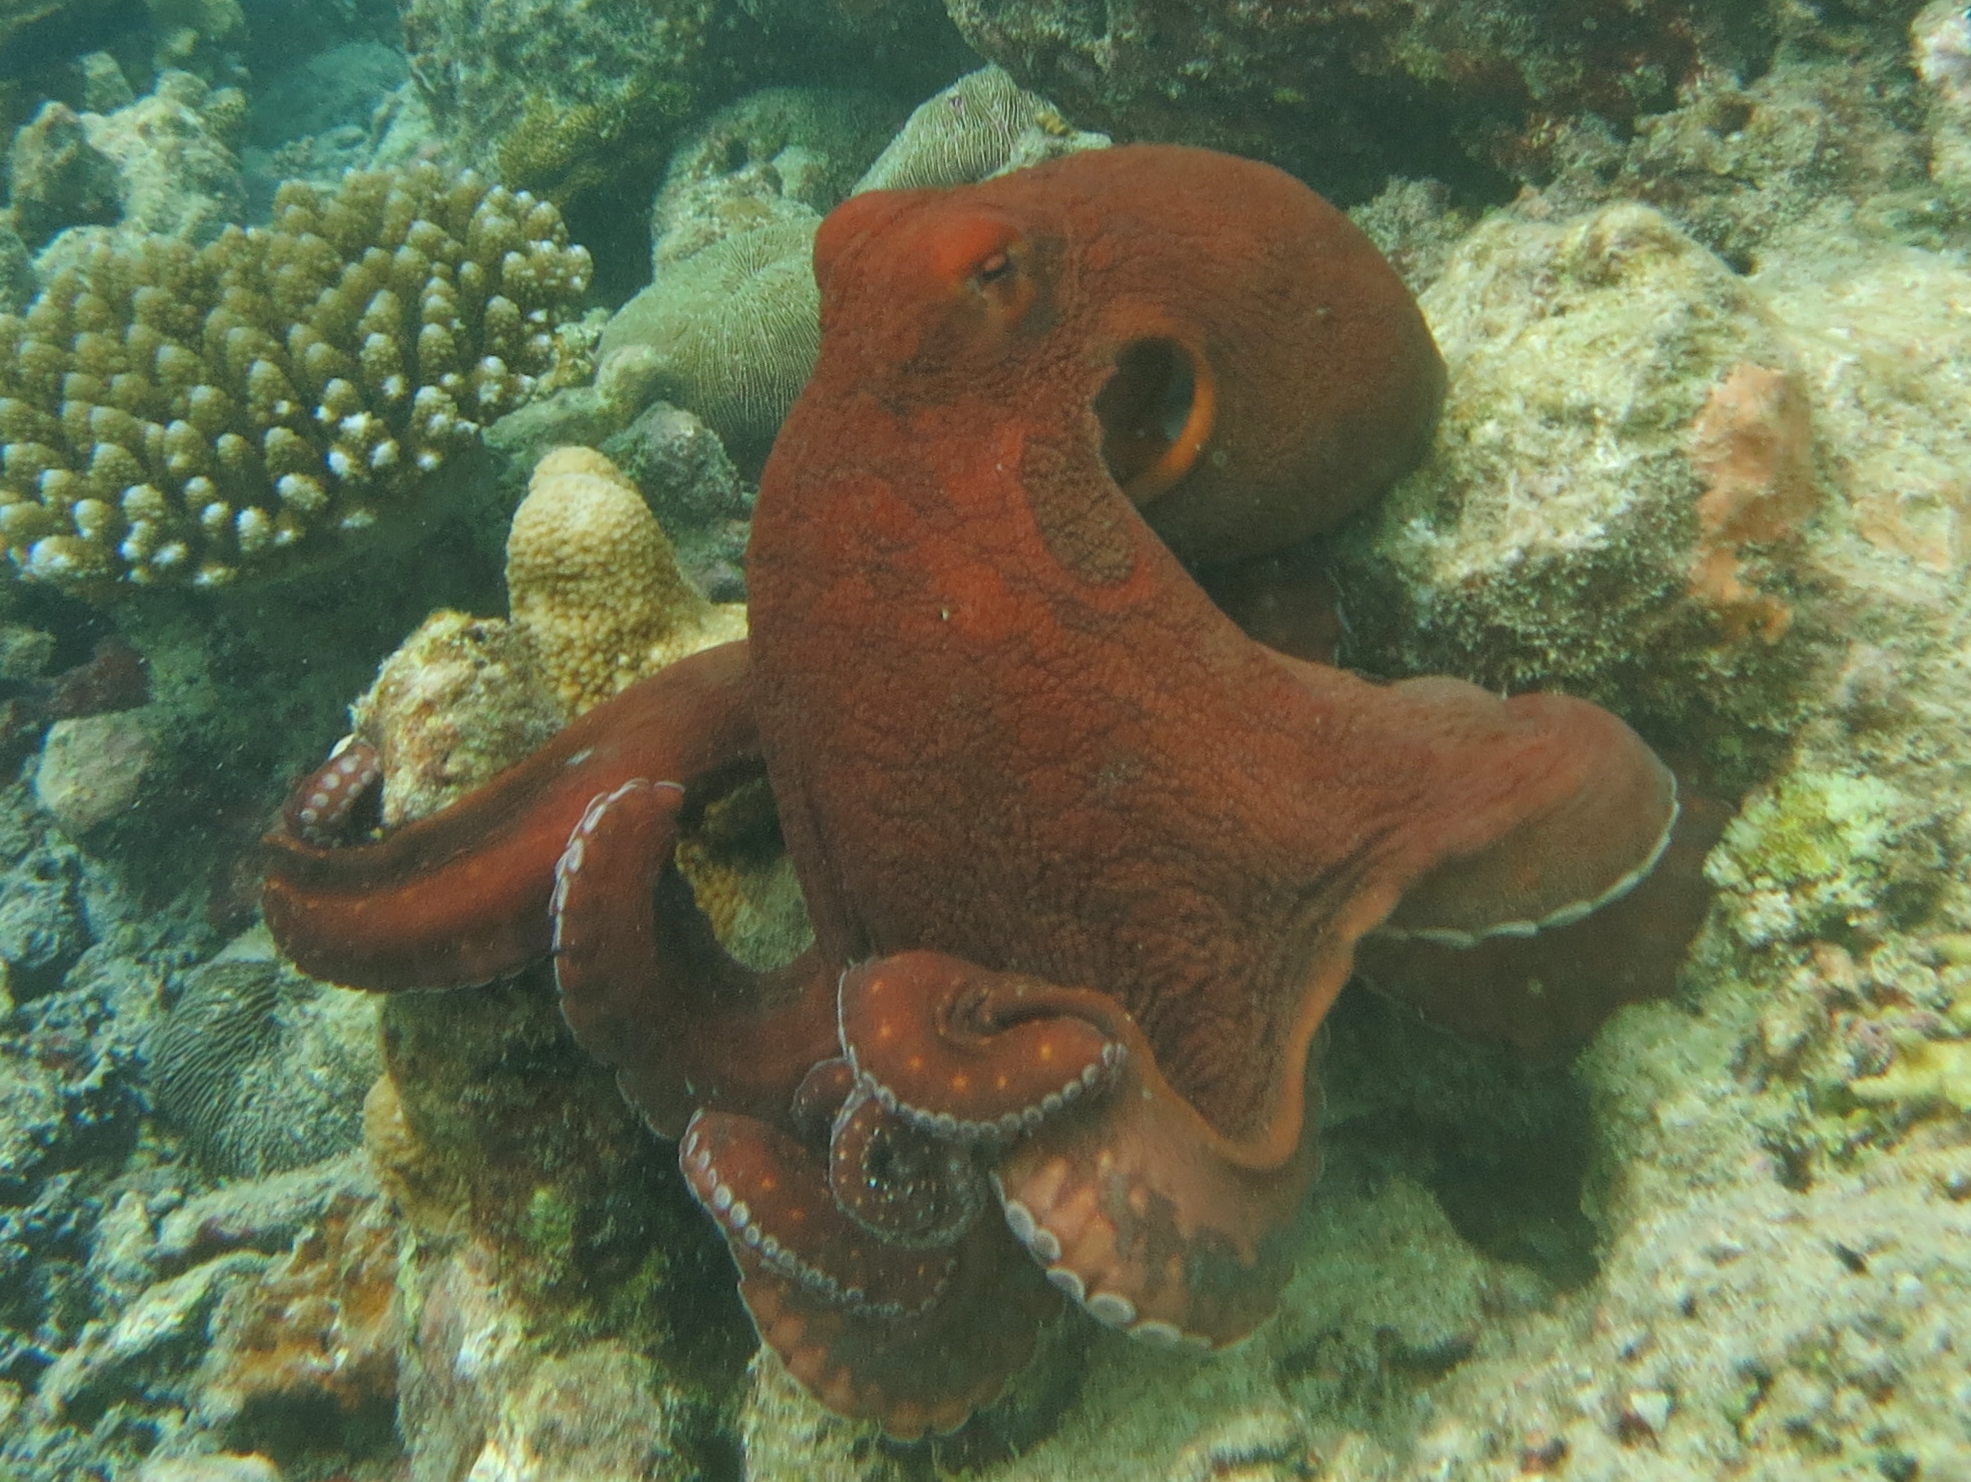 Day Octopus - The Octopus That Is Skilled At Disguise